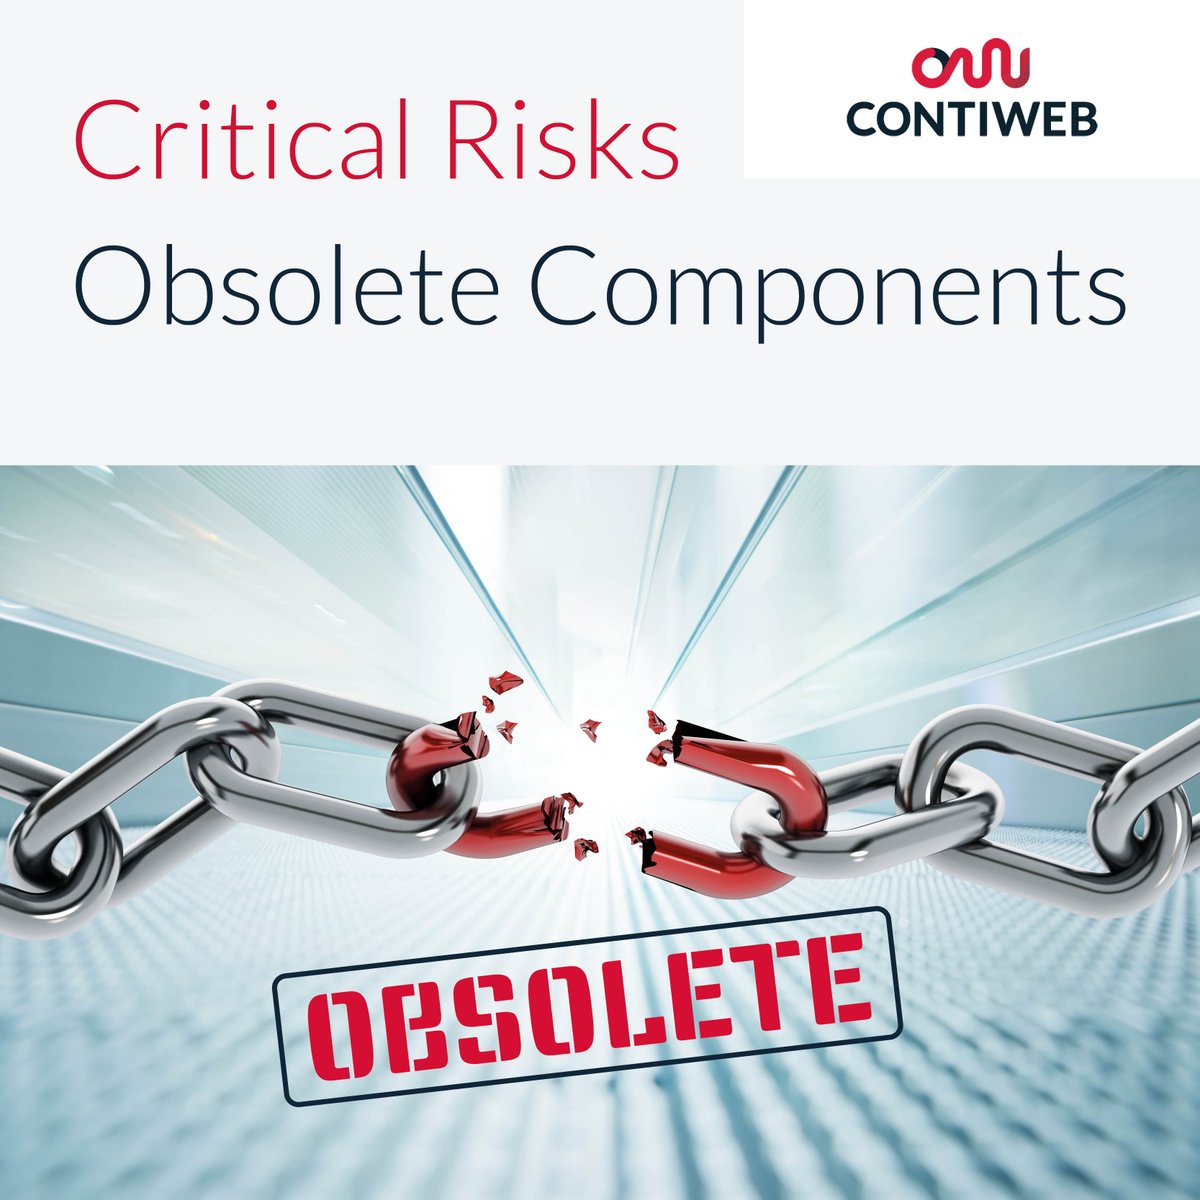 ⚠️ Obsolete components present a critical risk to production continuity of printing companies. How can these risks be managed? hubs.la/Q02vtKTX0

#SpareParts #ExpertGuide #RealizingYourFullPotential